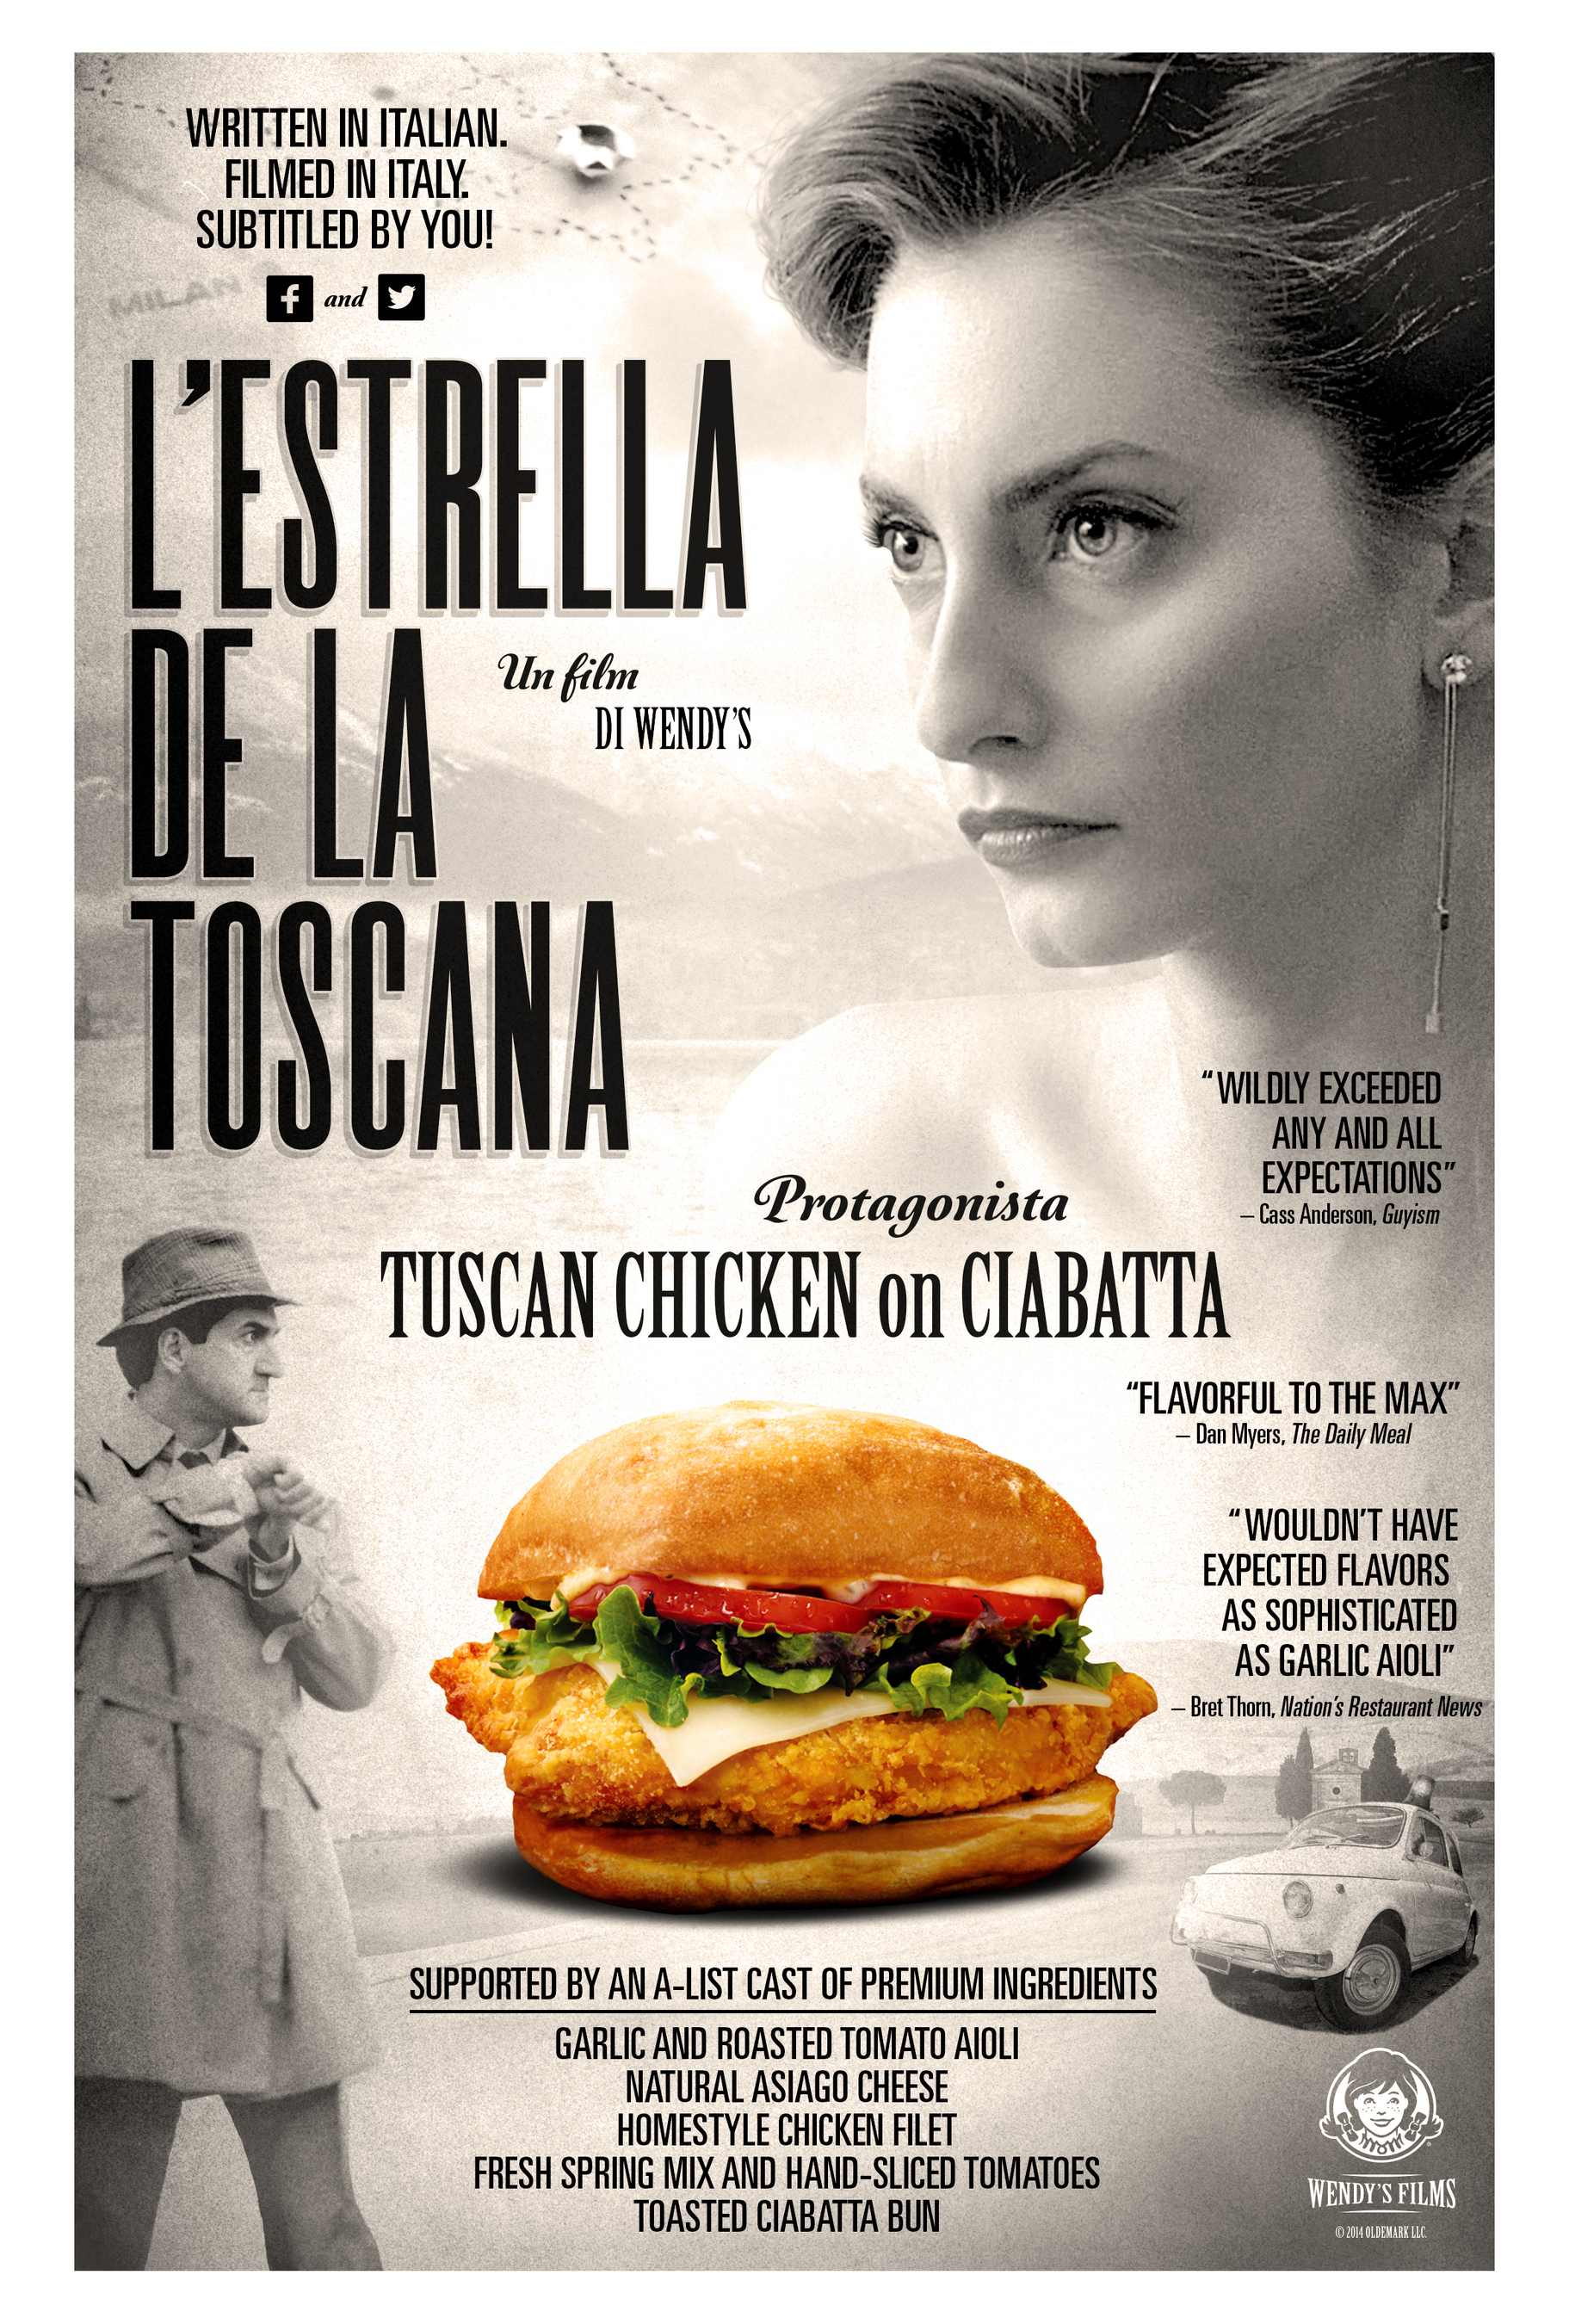 To celebrate the Italian-inspired Tuscan Chicken on Ciabatta, Wendy's is releasing a short film "L'Estrella de la Toscana" - Star of Tuscany - where fans will have the chance to taste the sandwich and submit captions to potentially be featured in the film.  (PRNewsFoto/The Wendy's Company)